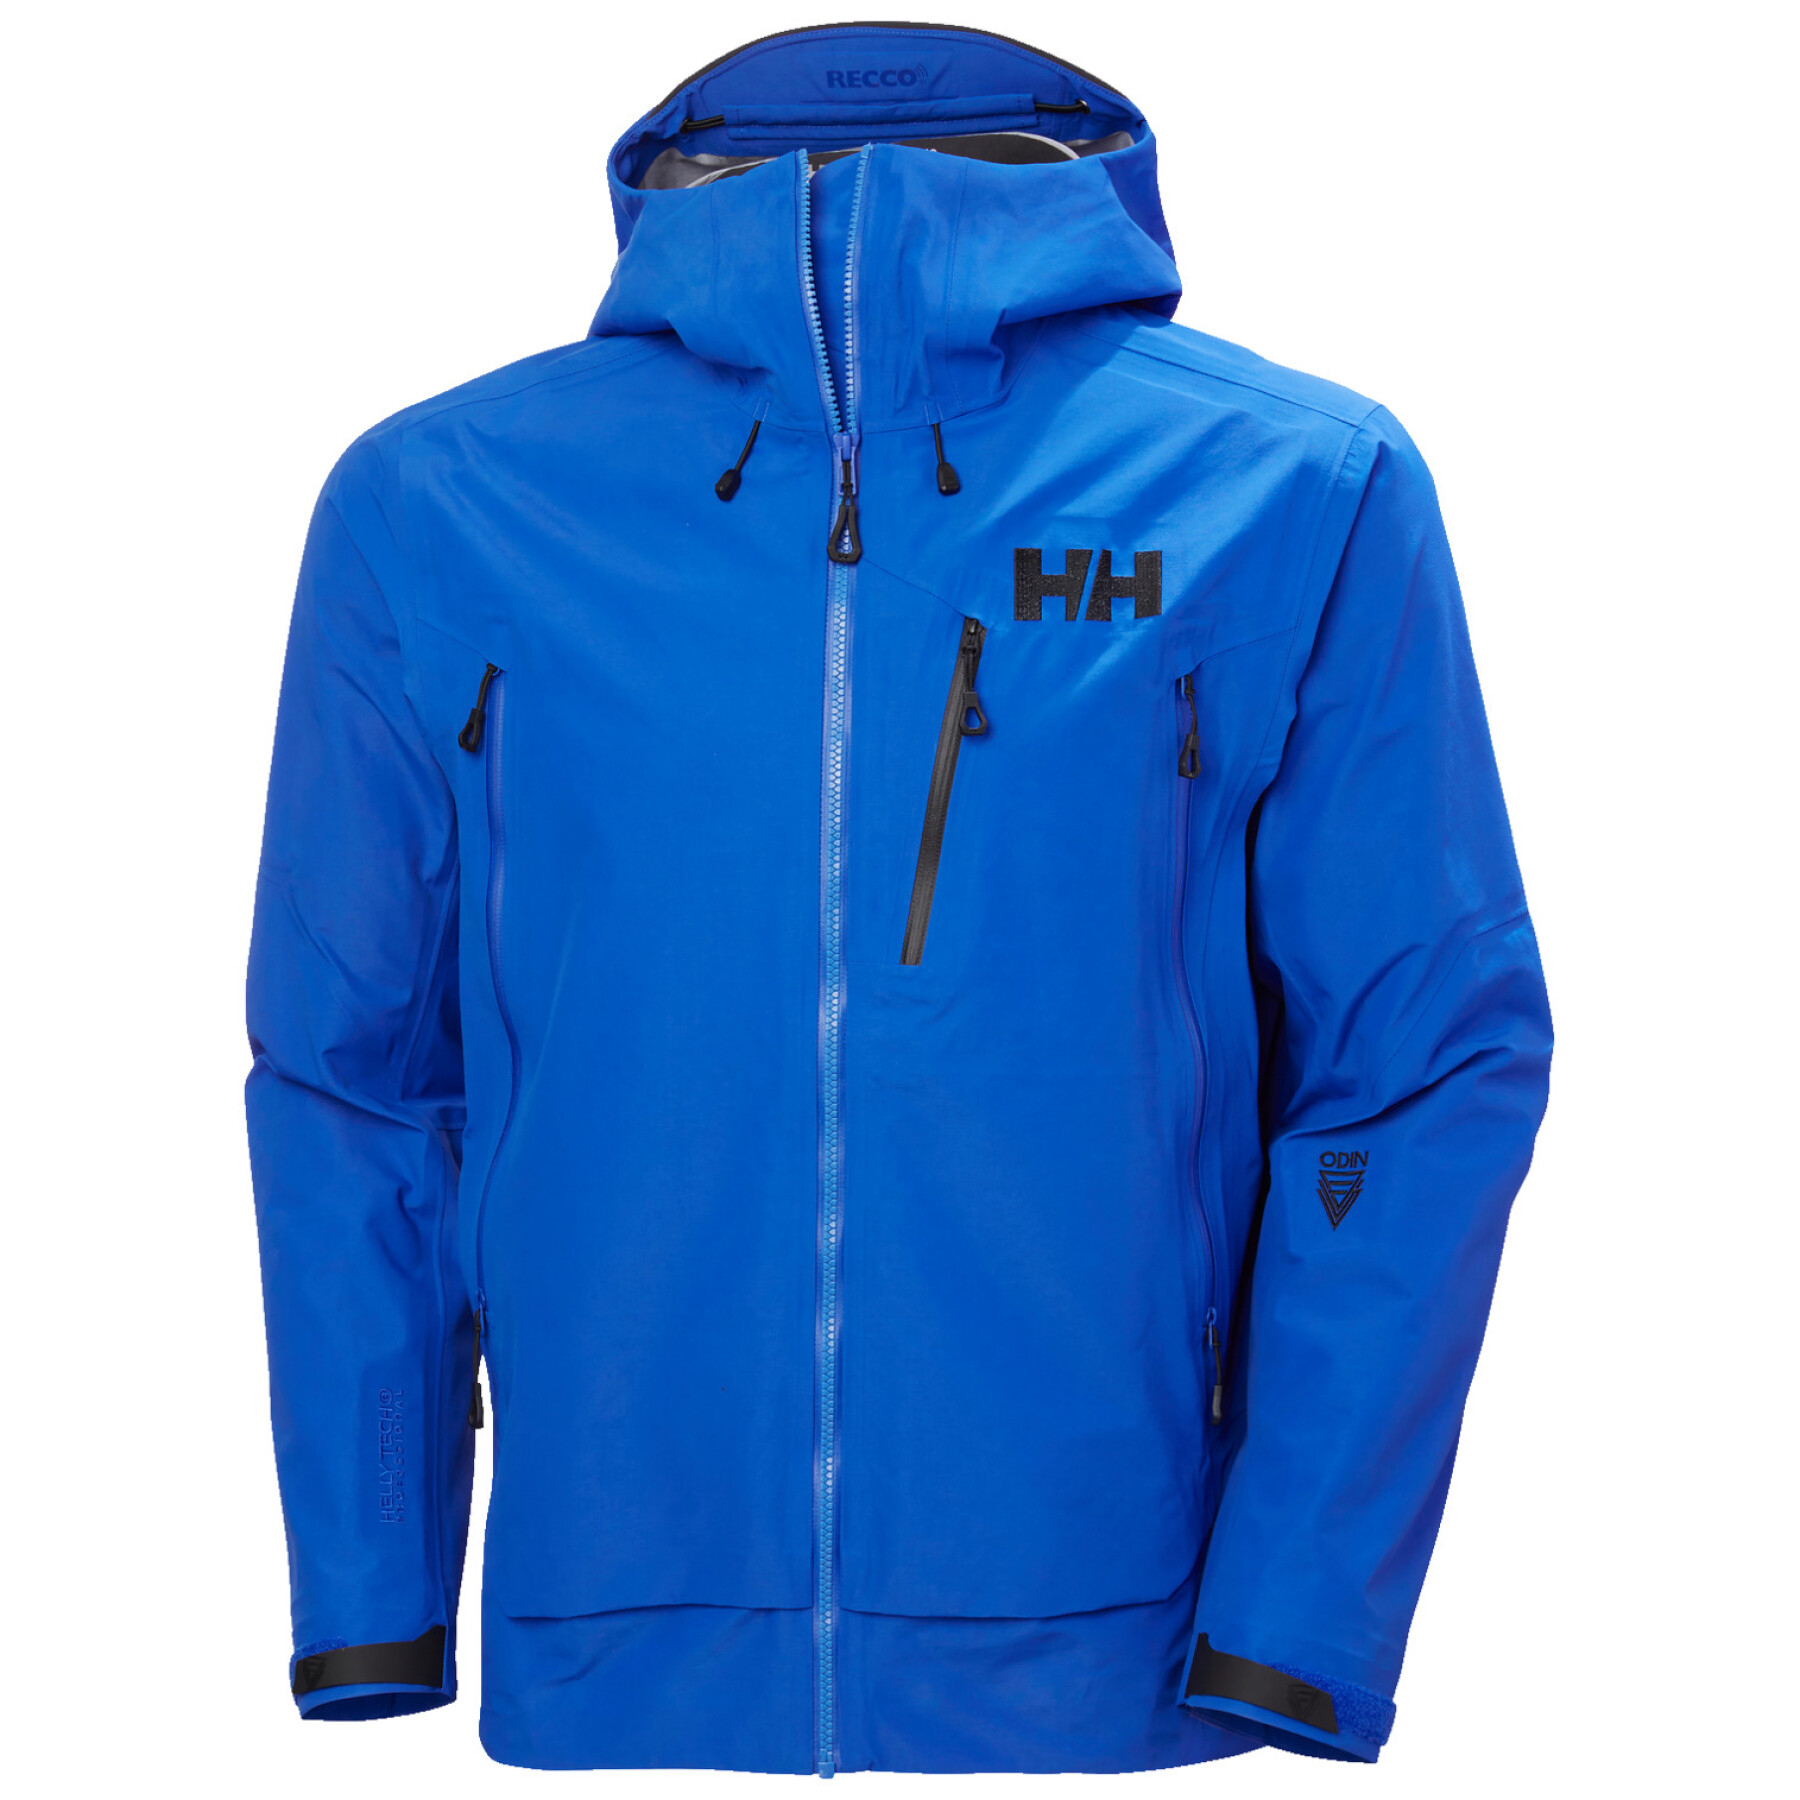 Chaqueta impermeable Helly Hansen Odin 9 Worlds 3.0